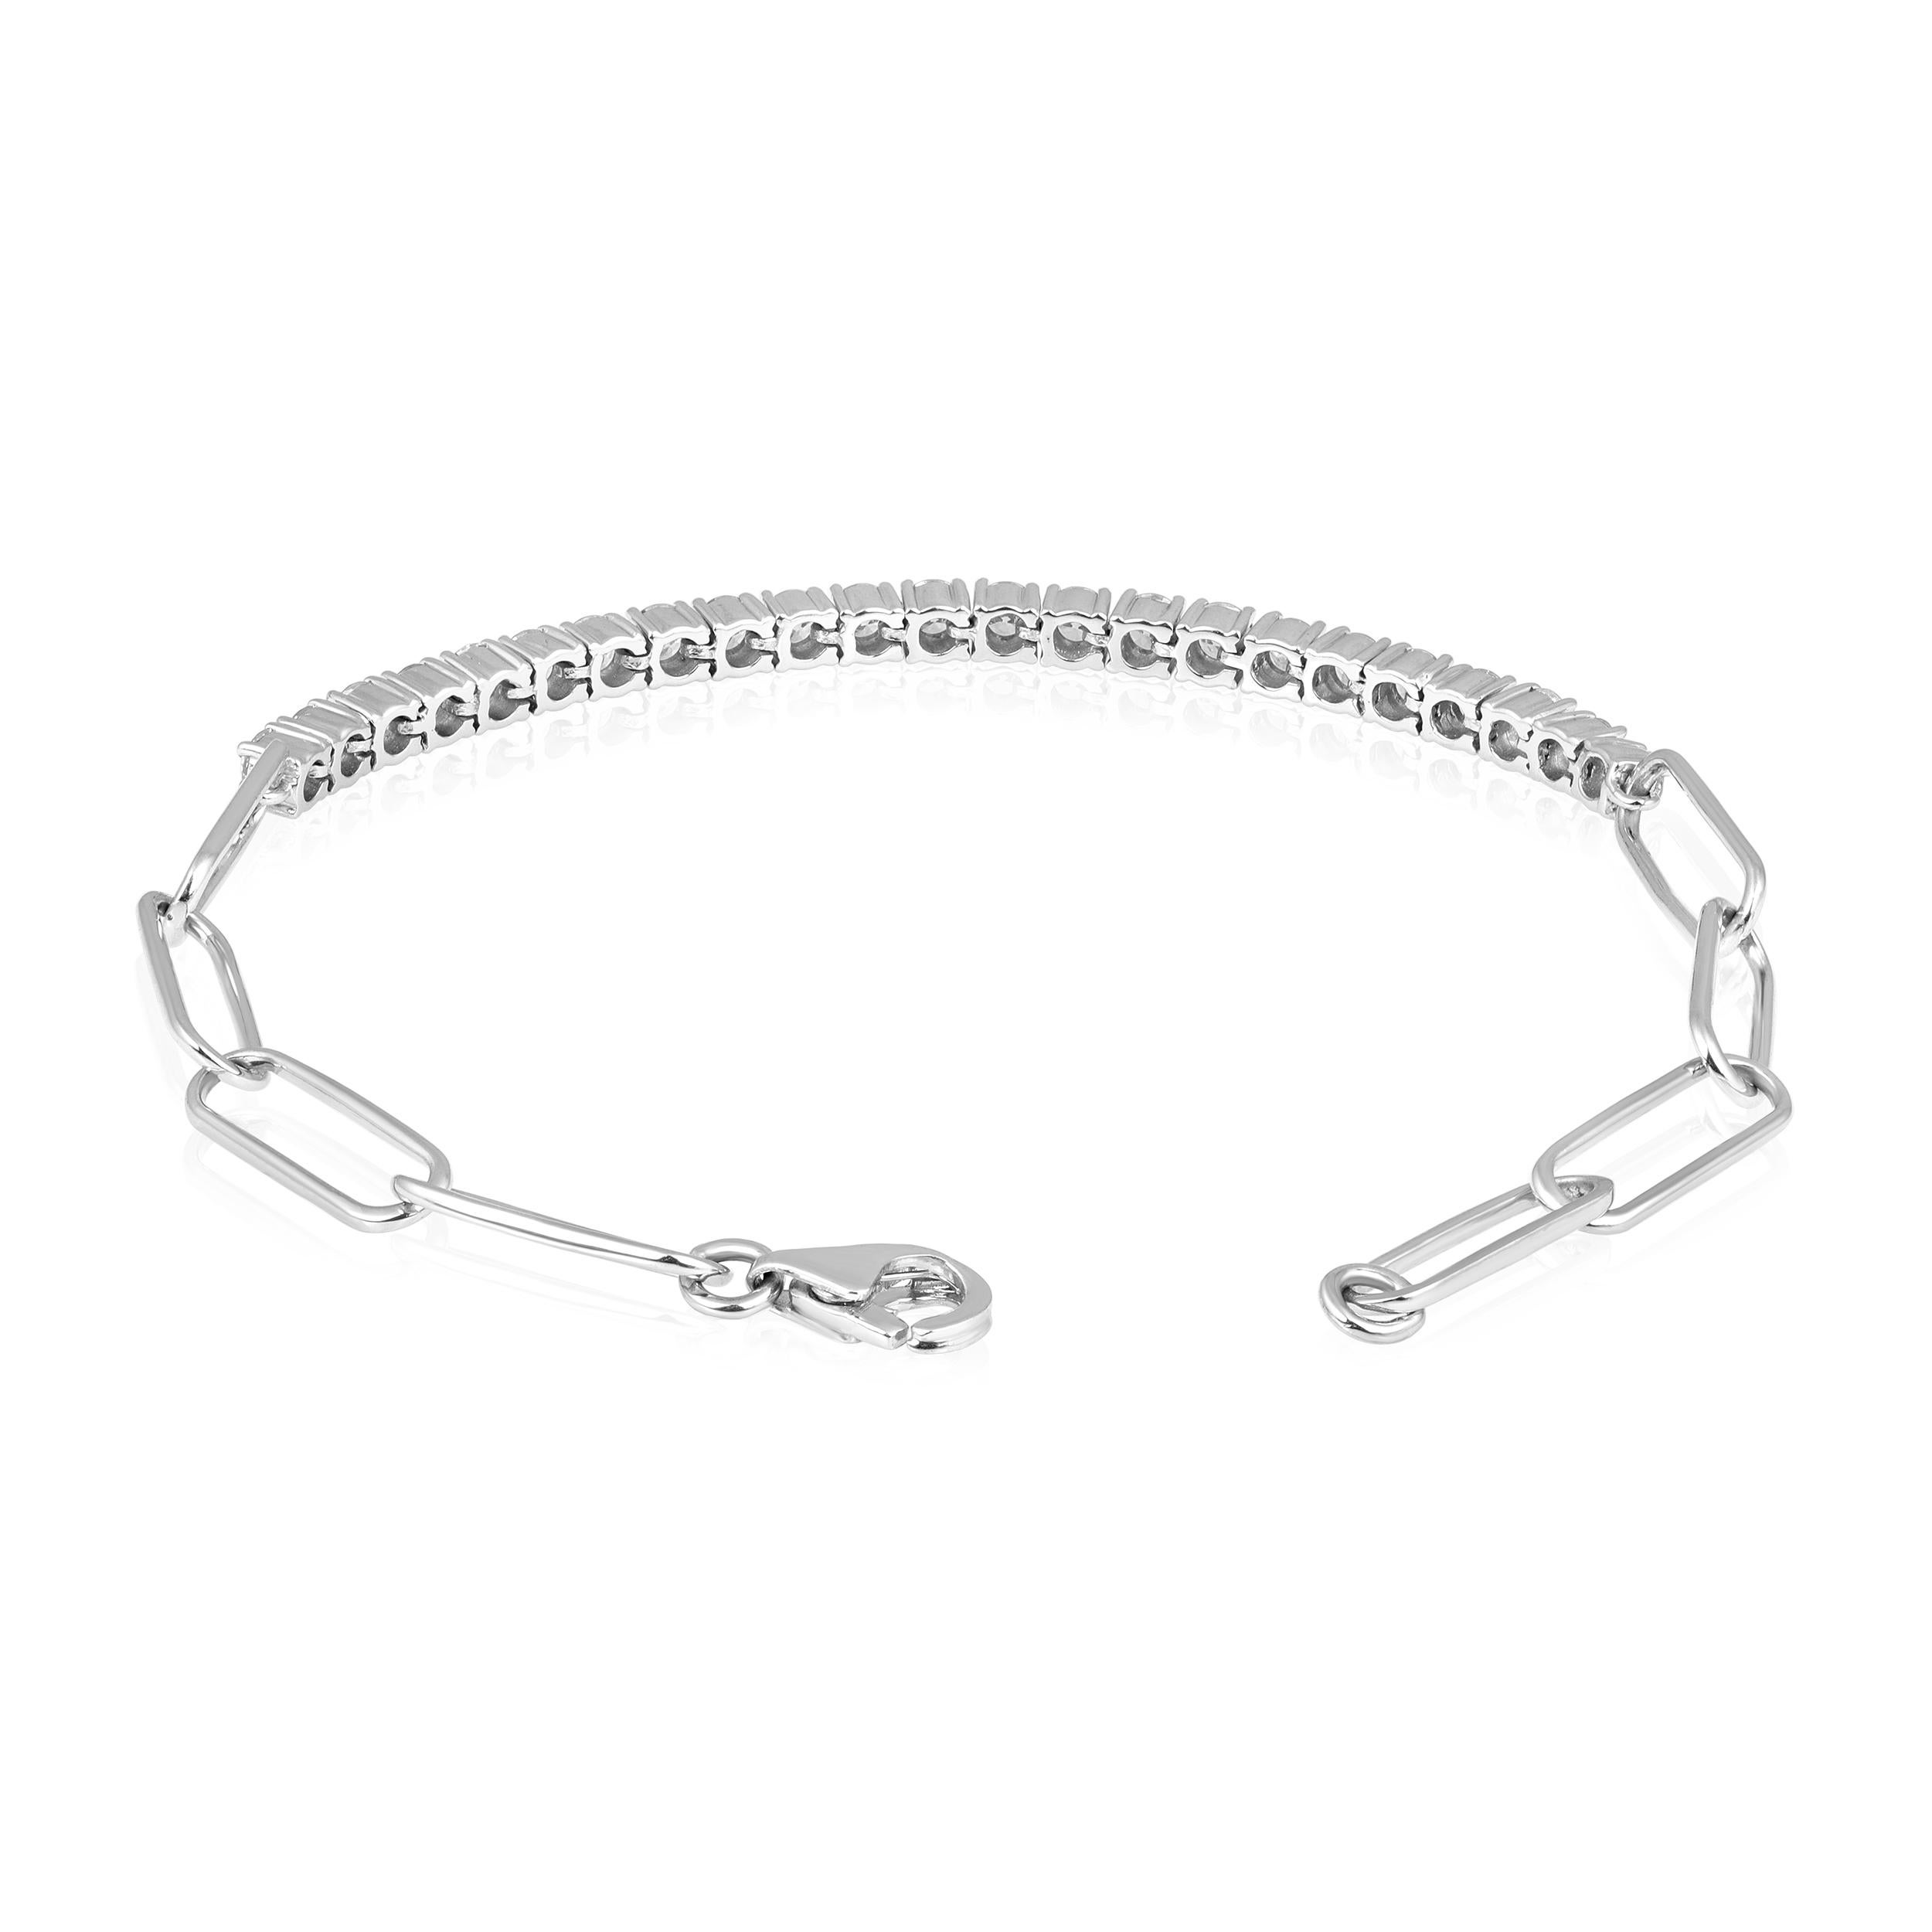 Crafted in 6.96 grams of 14K White Gold, the bracelet contains 23 stones of Round Natural Diamonds with a total of 2.03 carat in G-H color and SI clarity. The bracelet length is 7 inches.

CONTEMPORARY AND TIMELESS ESSENCE: Crafted in